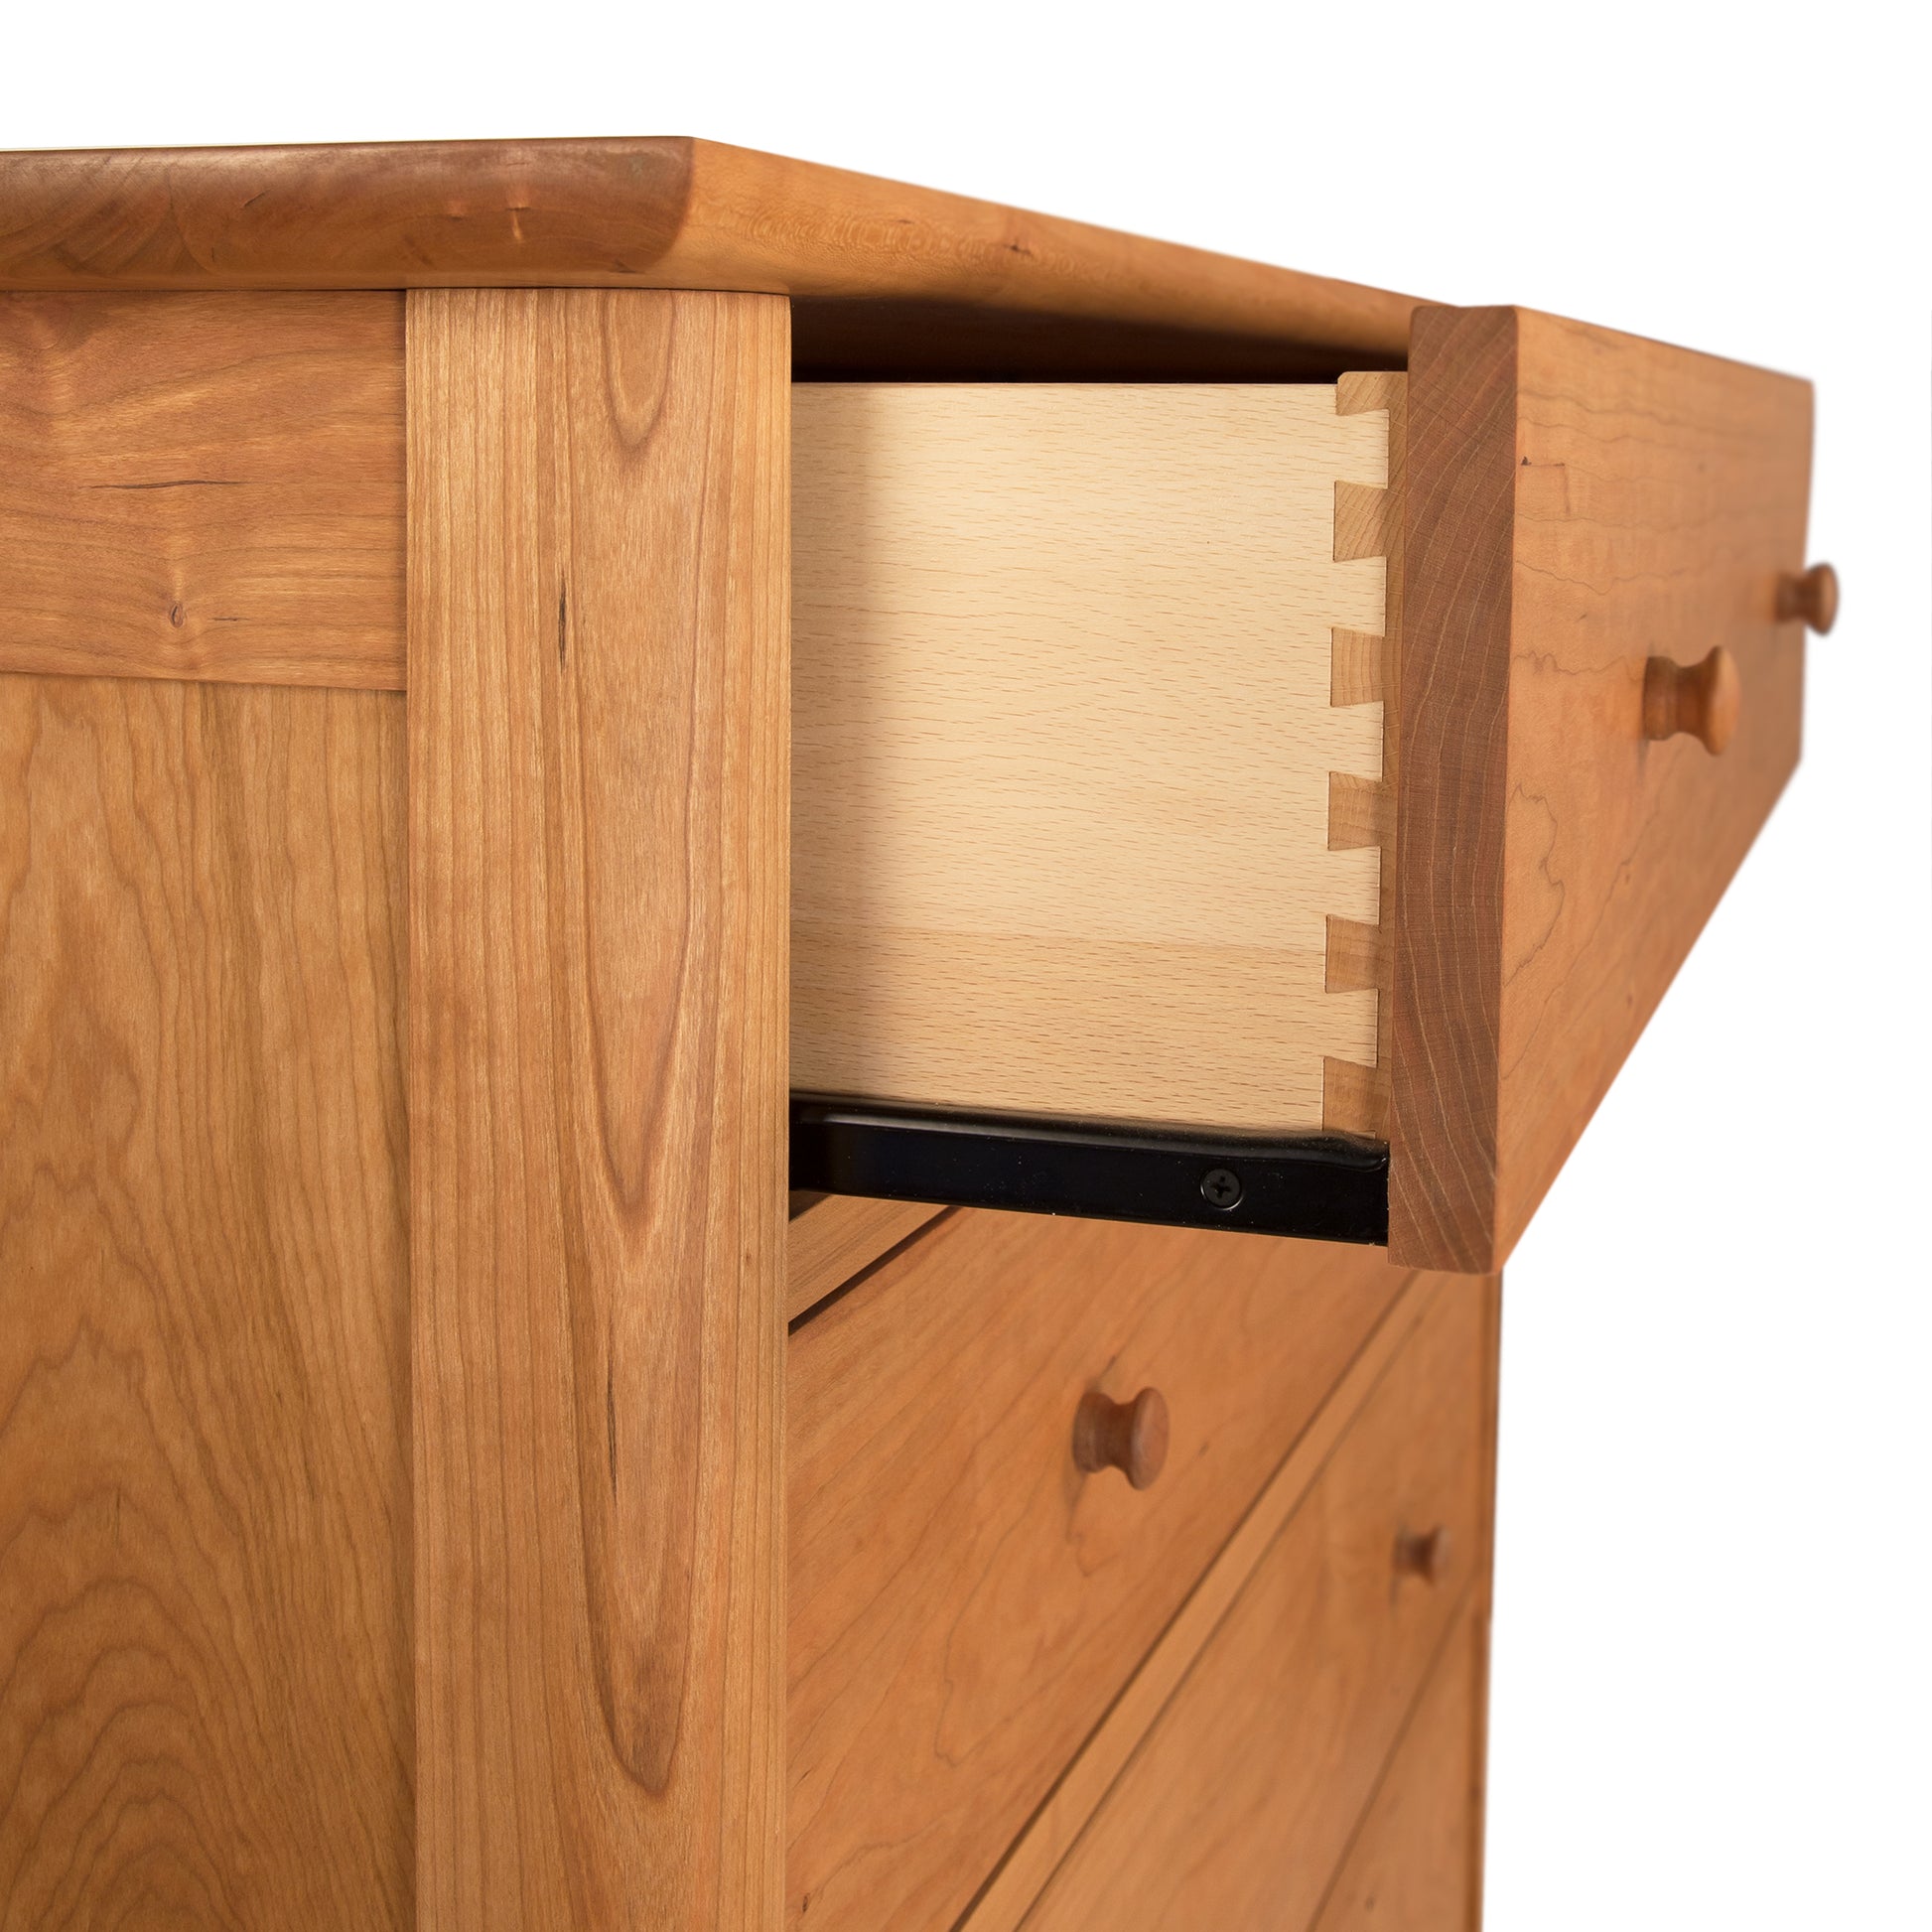 A contemporary wooden Heartwood Shaker 5-Drawer Chest by Vermont Furniture Designs with a single Heartwood Shaker drawer.